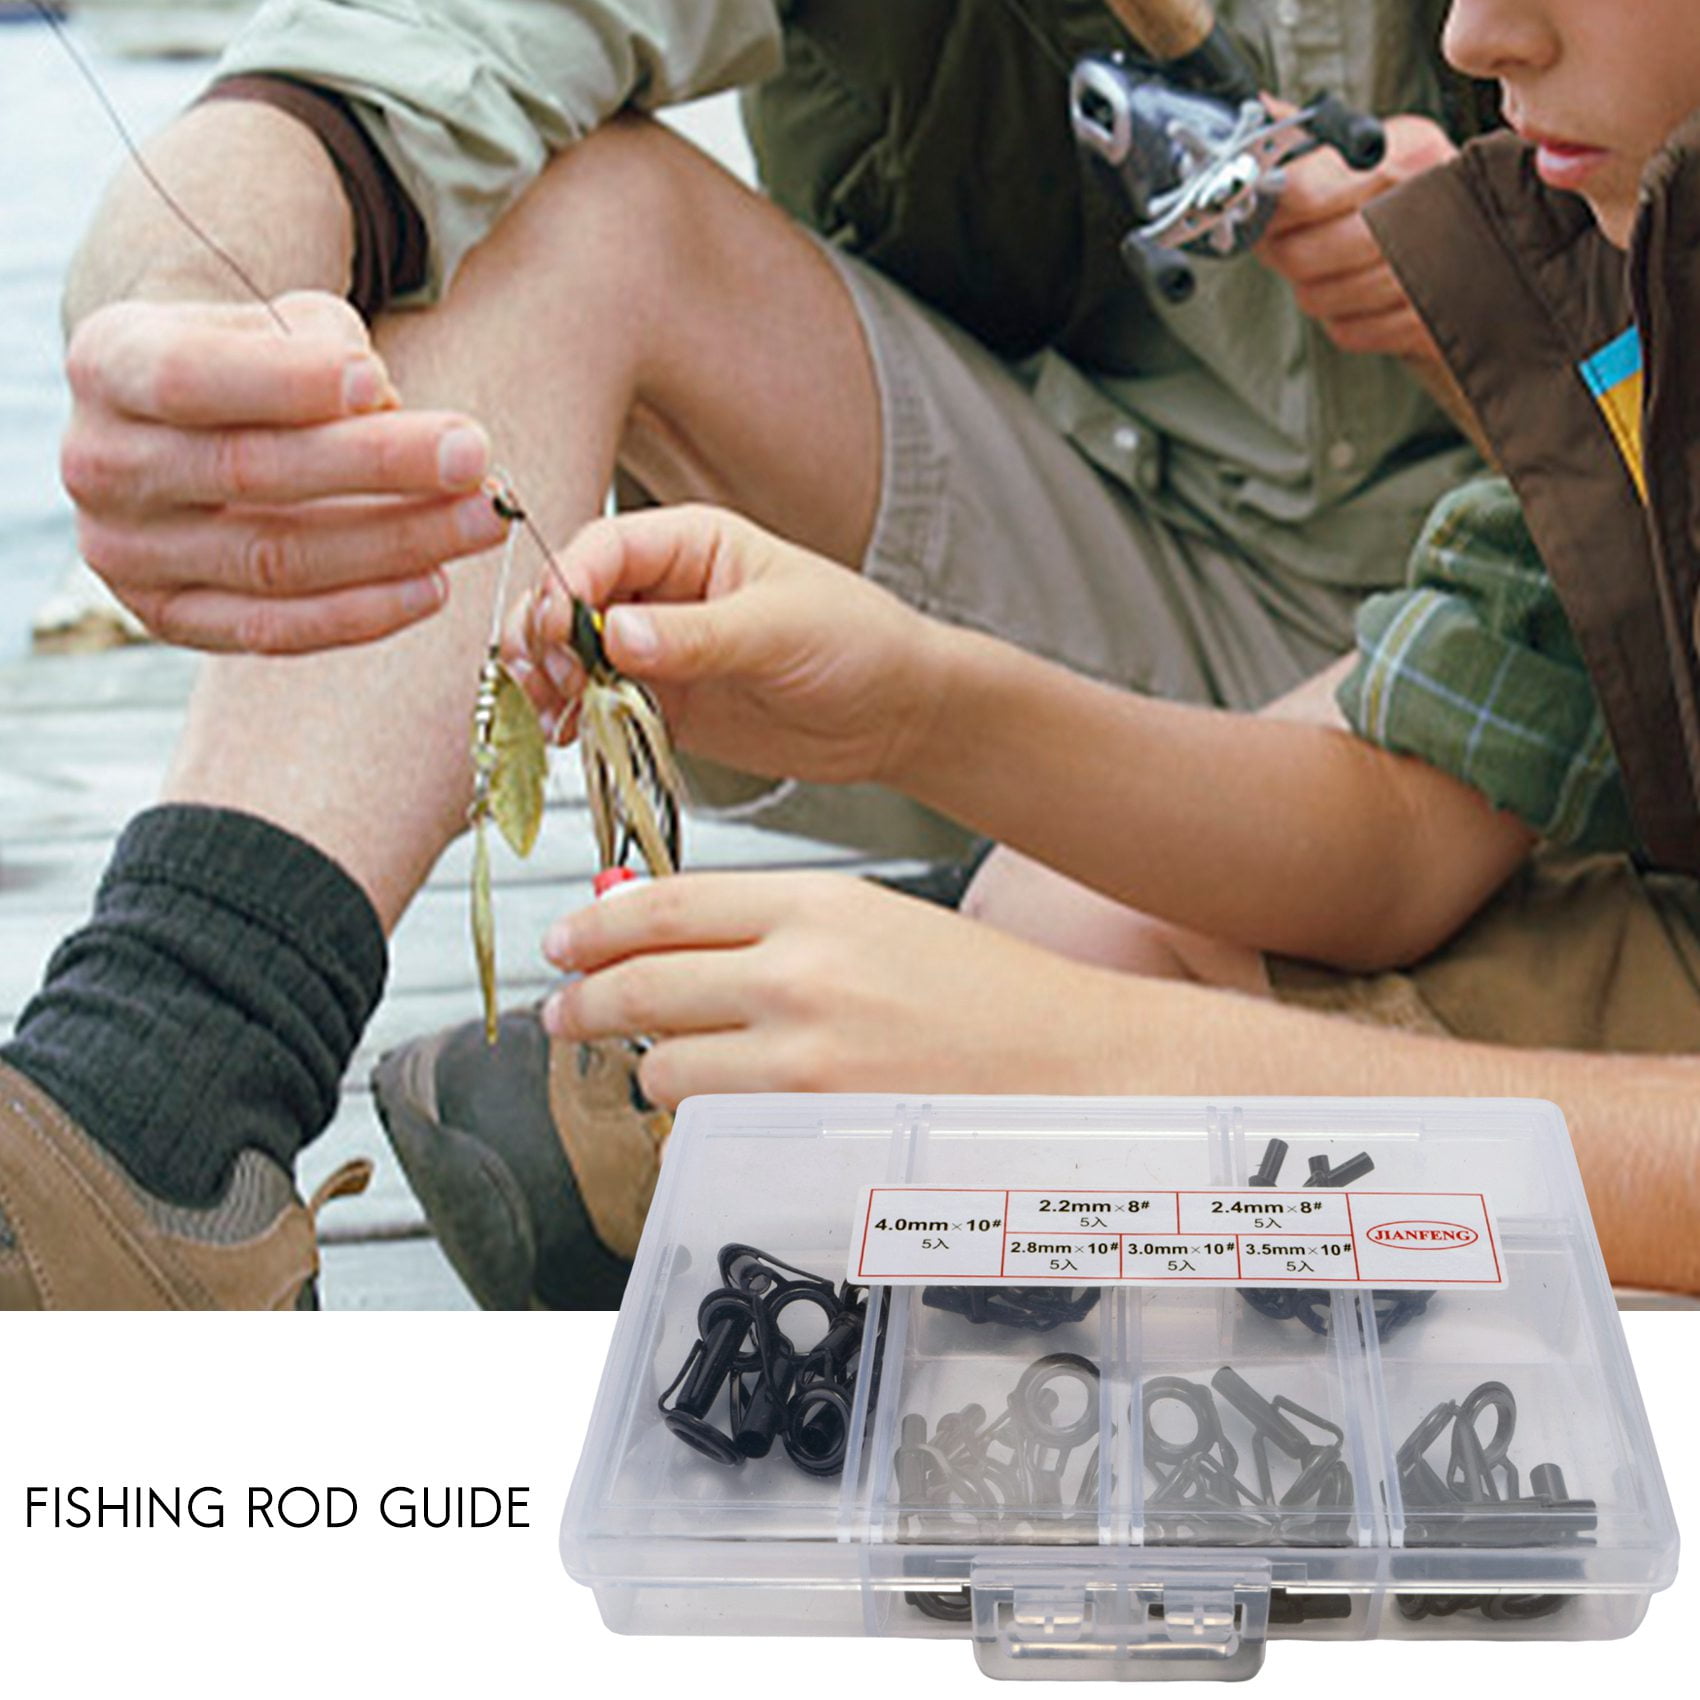 DIY Aluminum Jon Boats Fishing Repair Kit 7/Rod Tip Guides With Stainless  Steel Frames, Ceramic Ring, Spinning Casting Tackle Tool From Ren05, $4.68